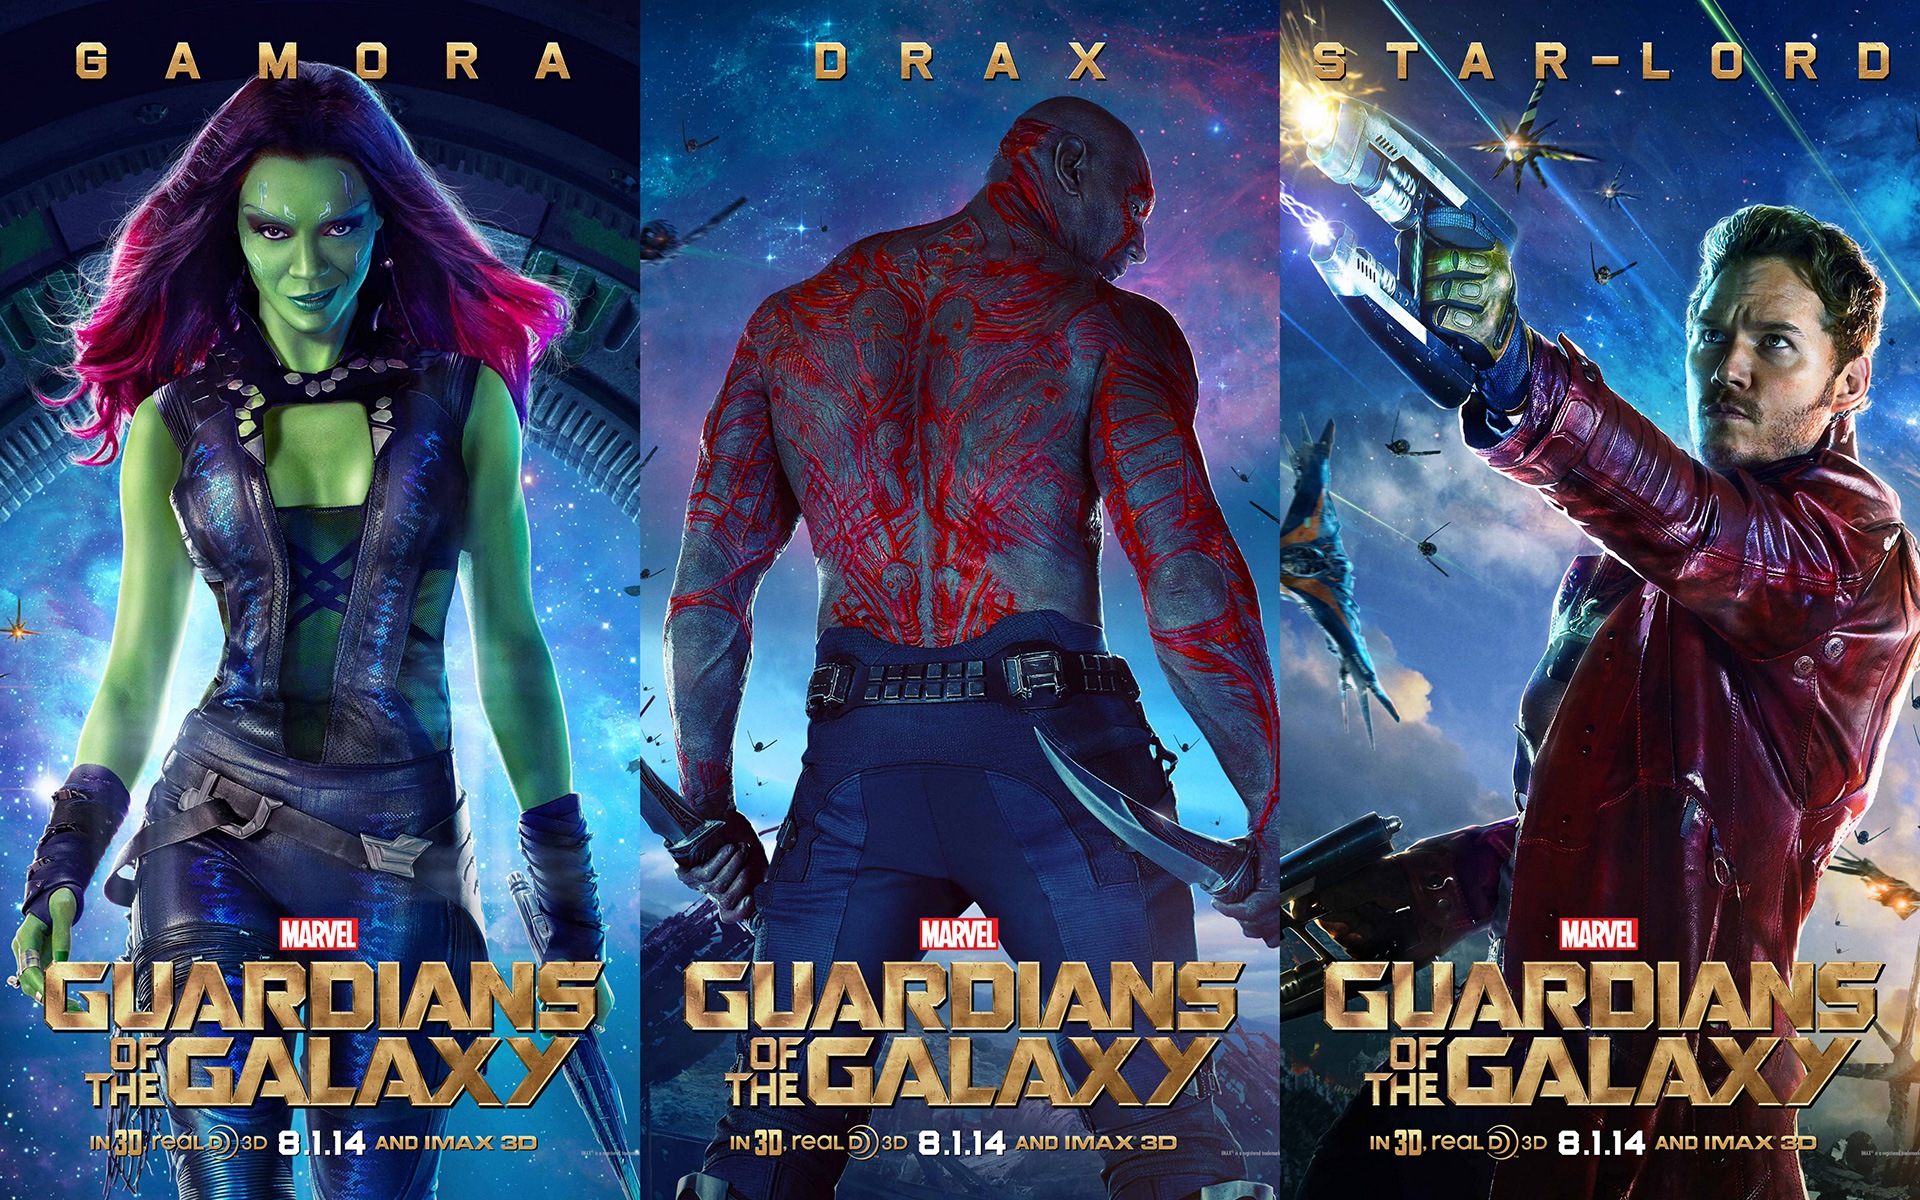 Guardians of the Galaxy 2014 HD movie wallpapers #12 - 1920x1200